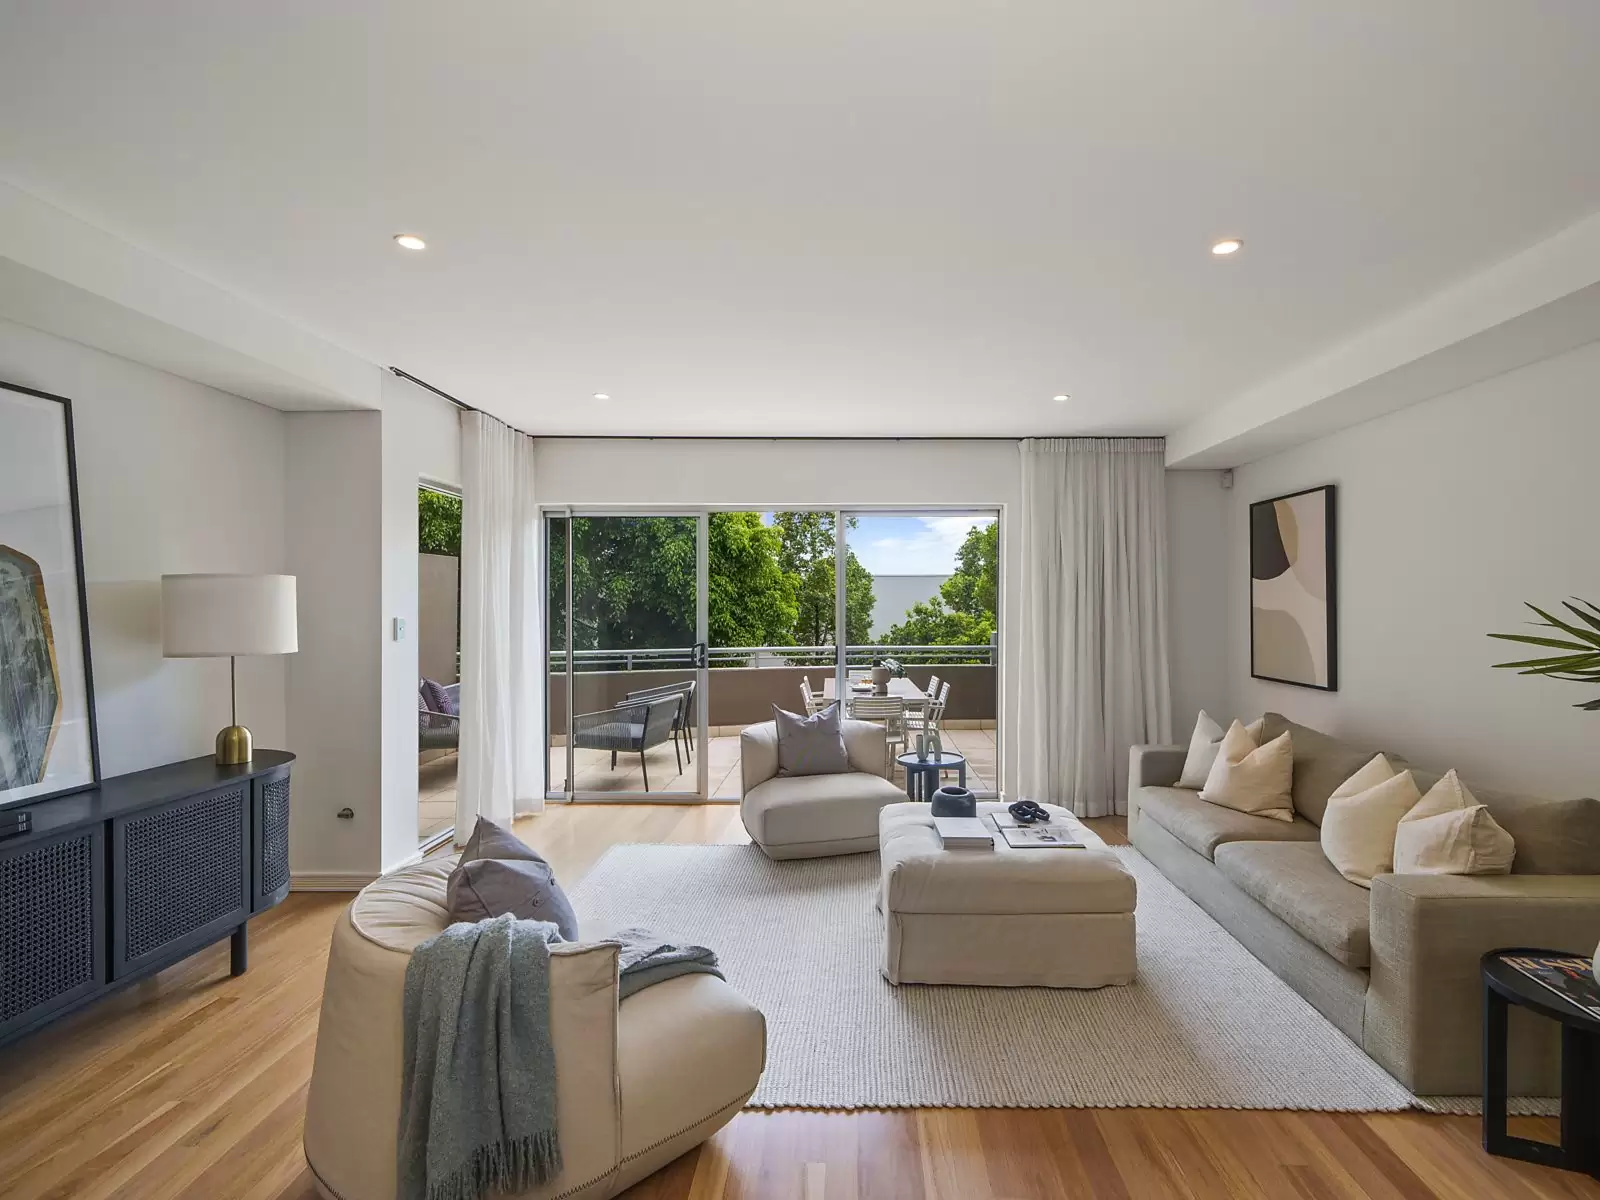 Photo #2: 7/30-32 Birriga Road, Bellevue Hill - Auction by Sydney Sotheby's International Realty